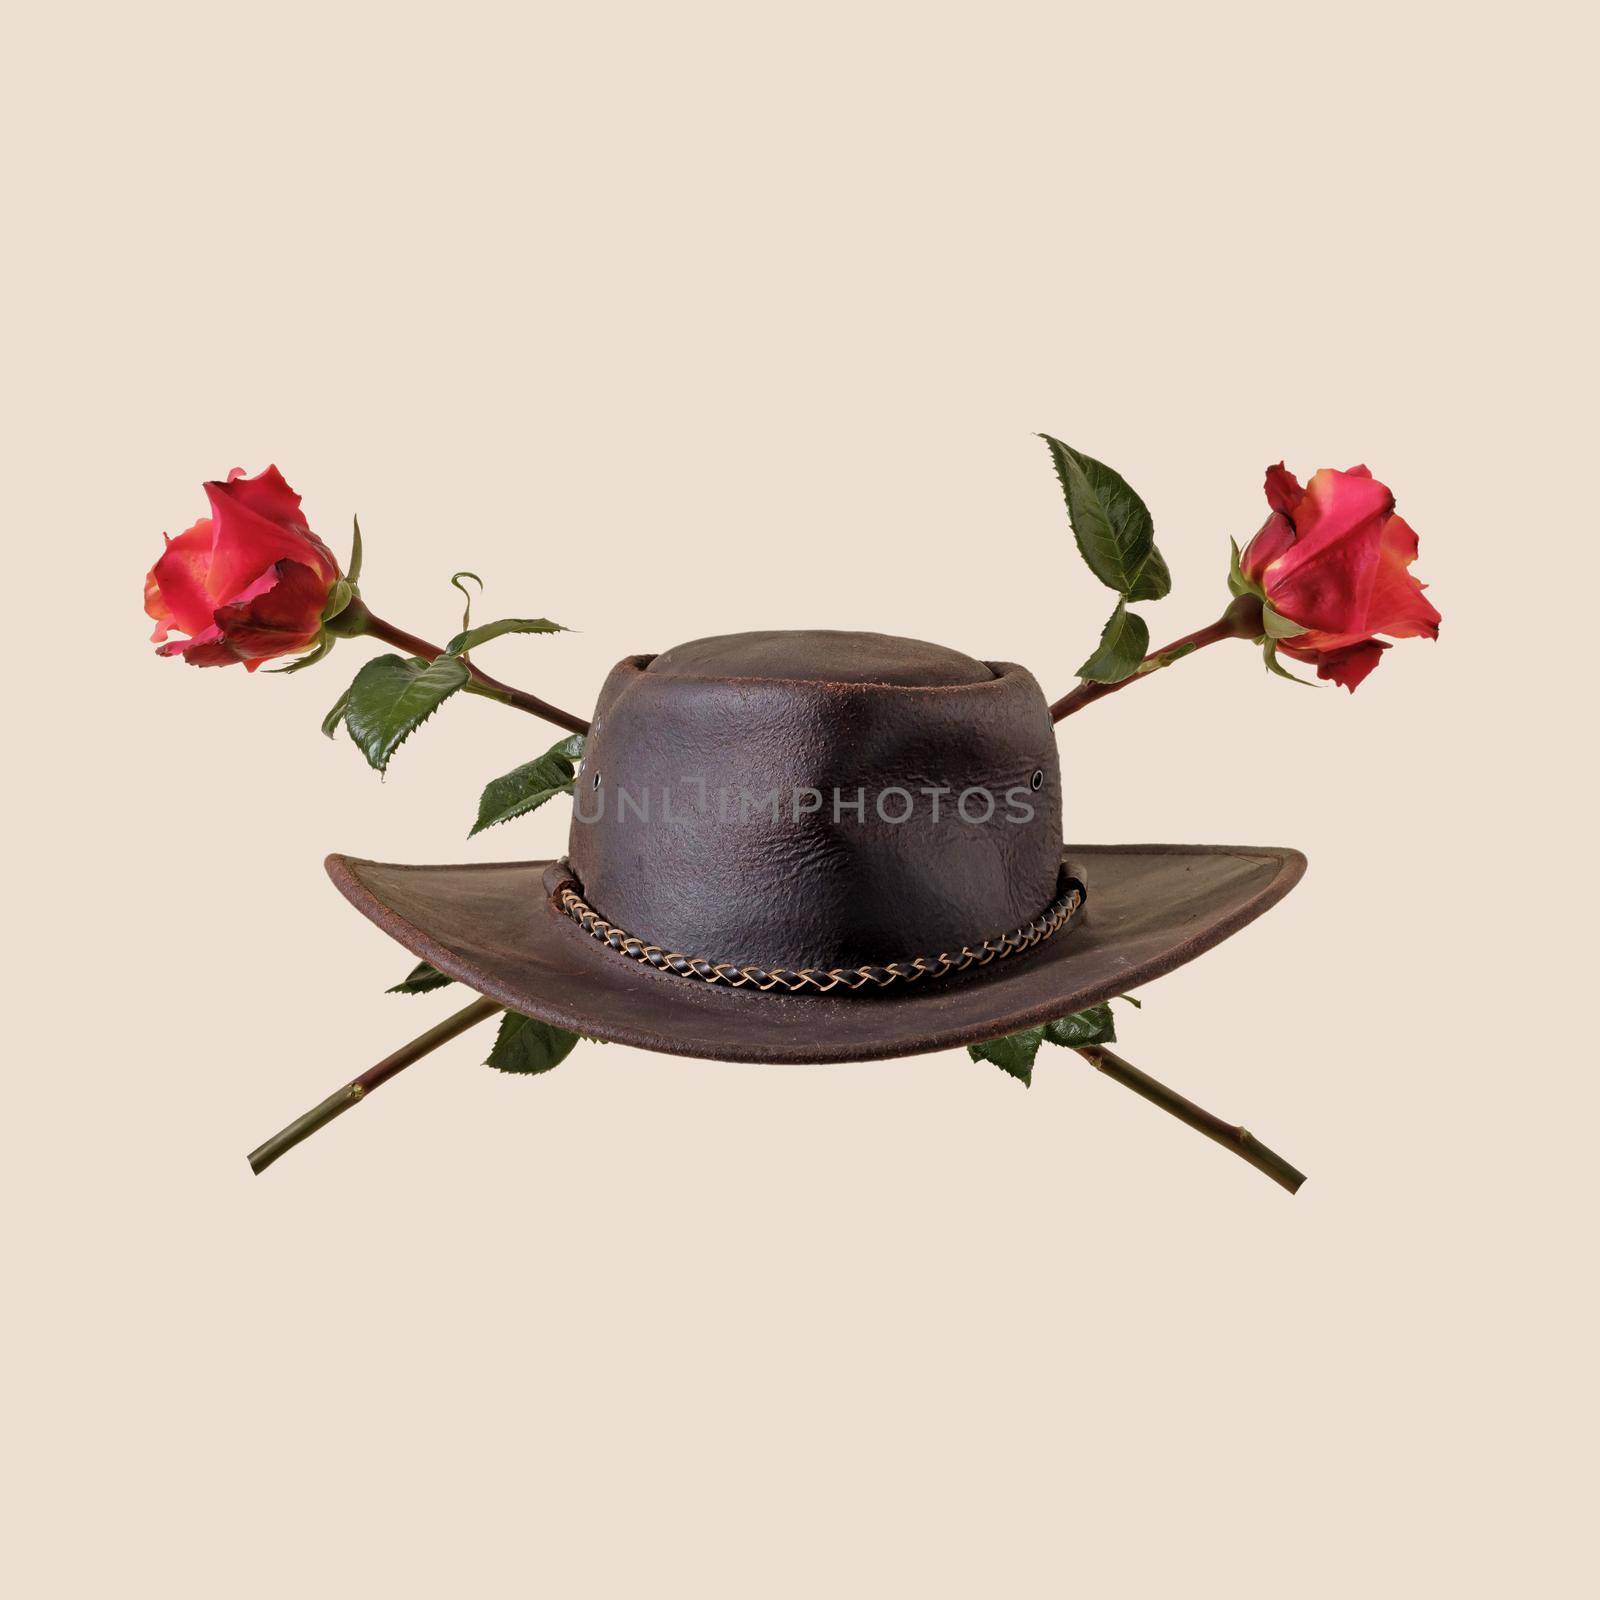 Cowboy hat and rose flowers wild west party concept classic stetson and american western.